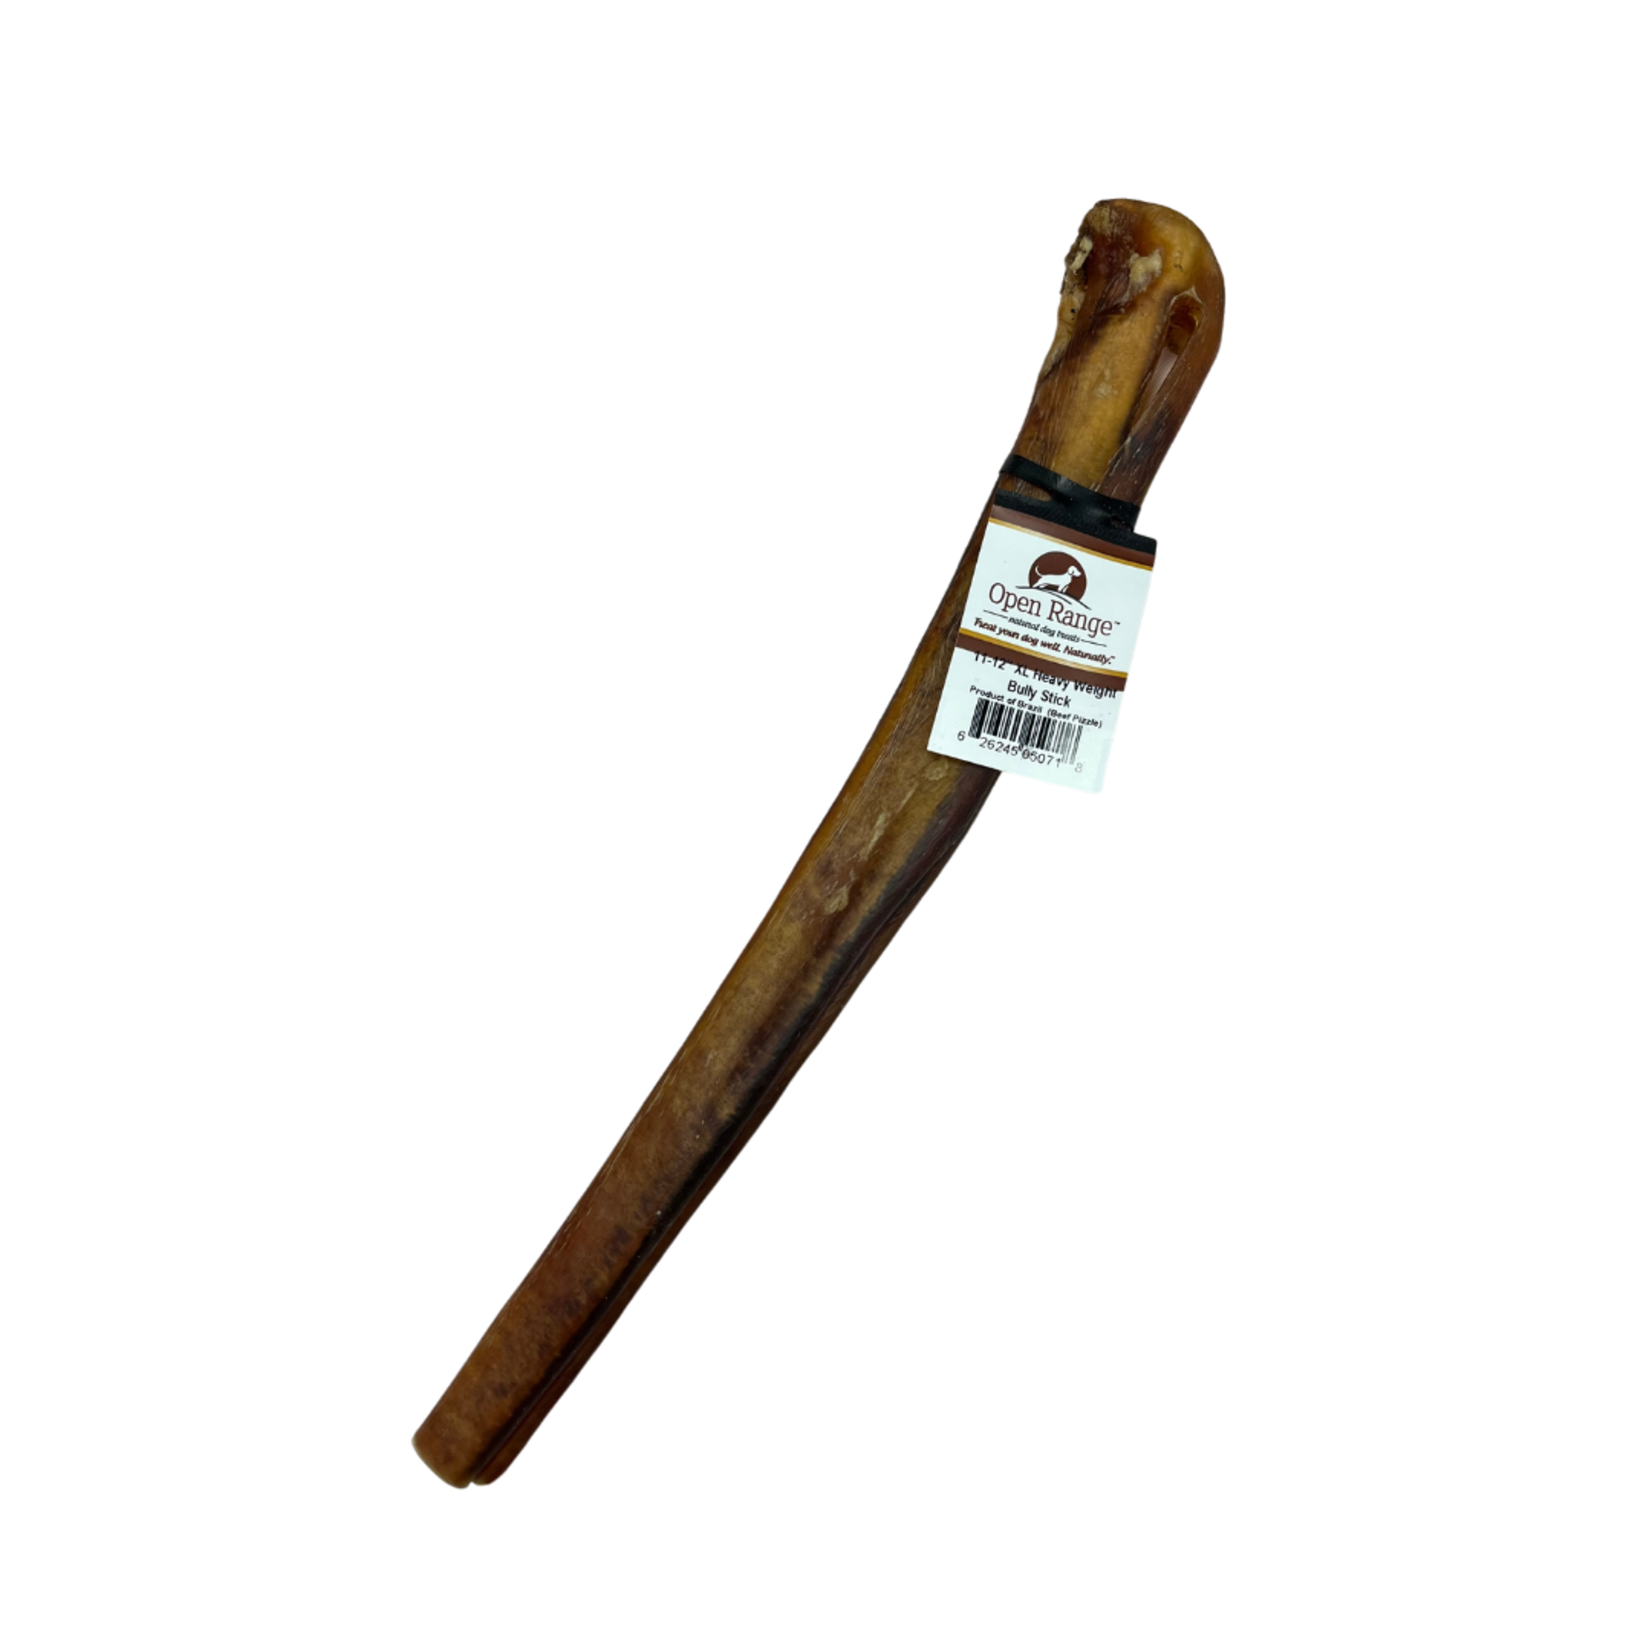 Open Range Open Range Extra Thick Bully Stick 11-12in 105 gr